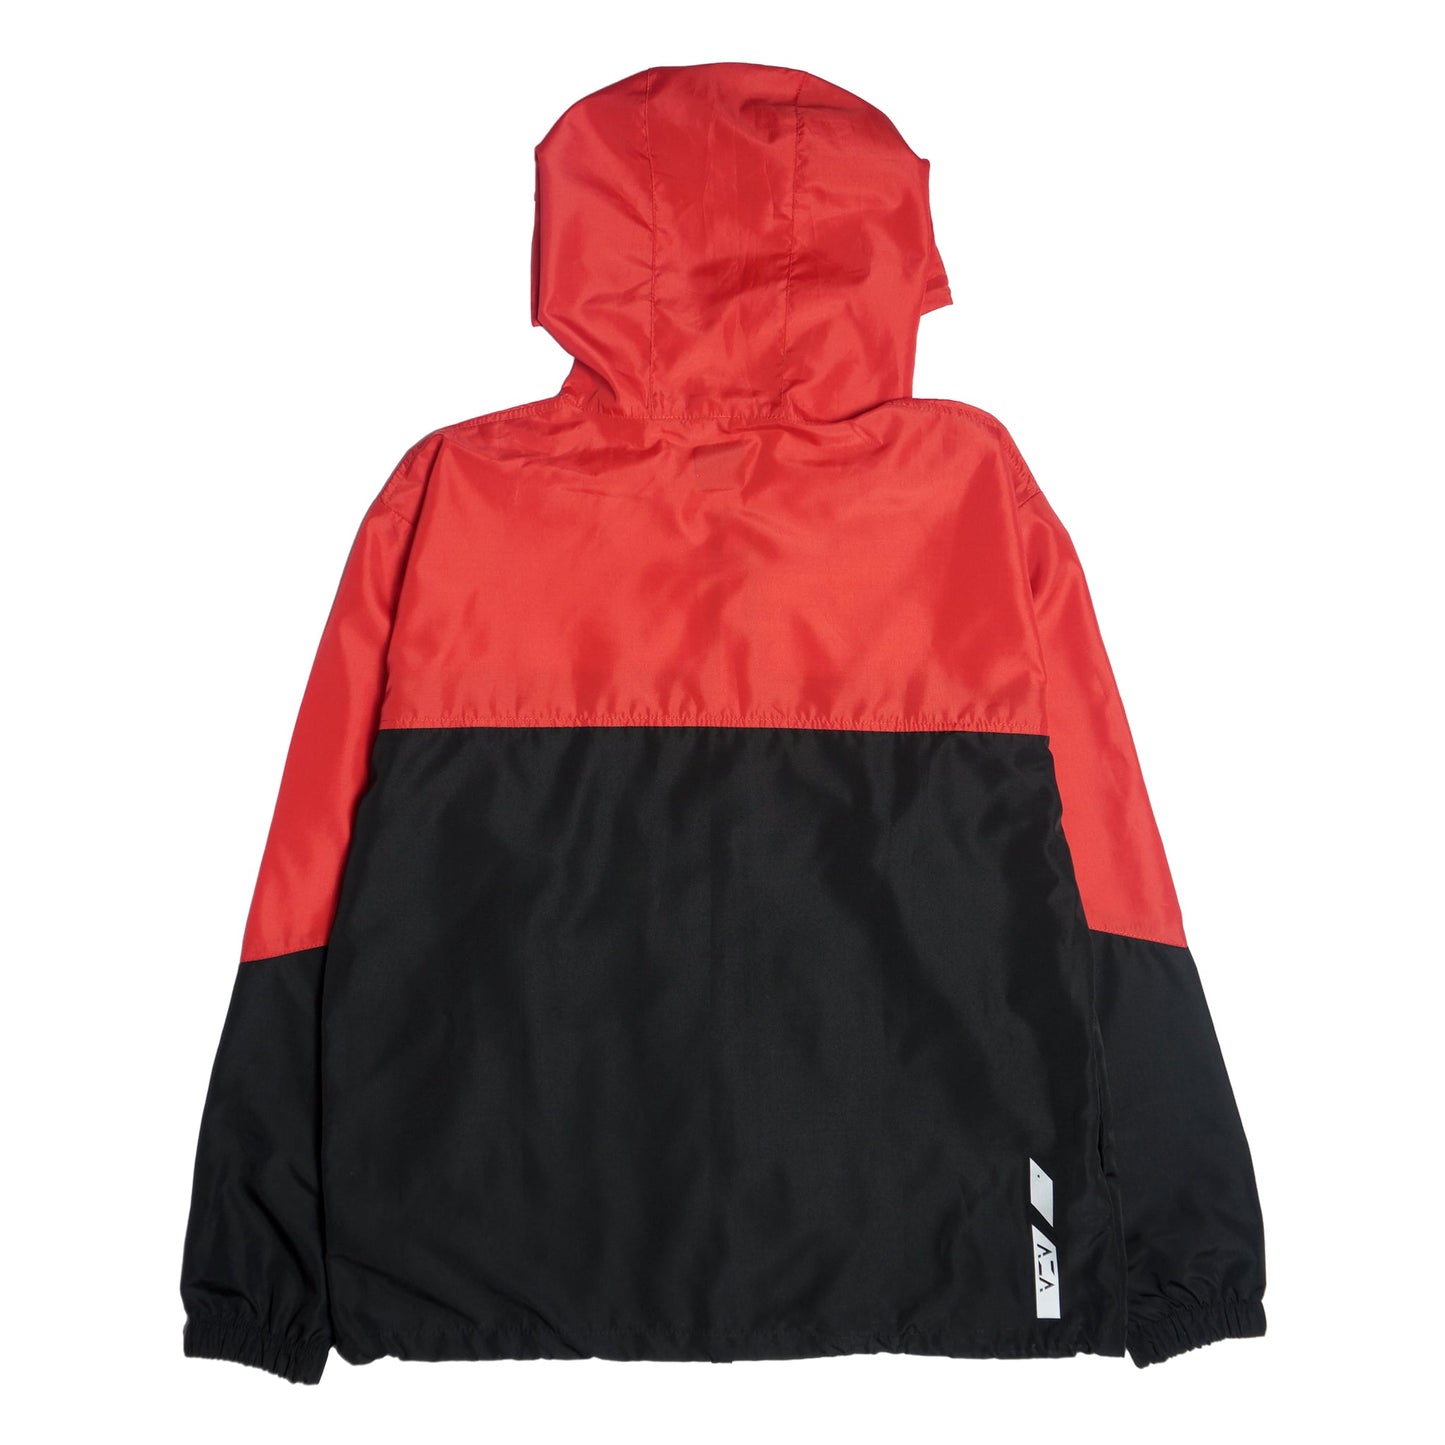 AZA Two Color Jacket - Black / Red